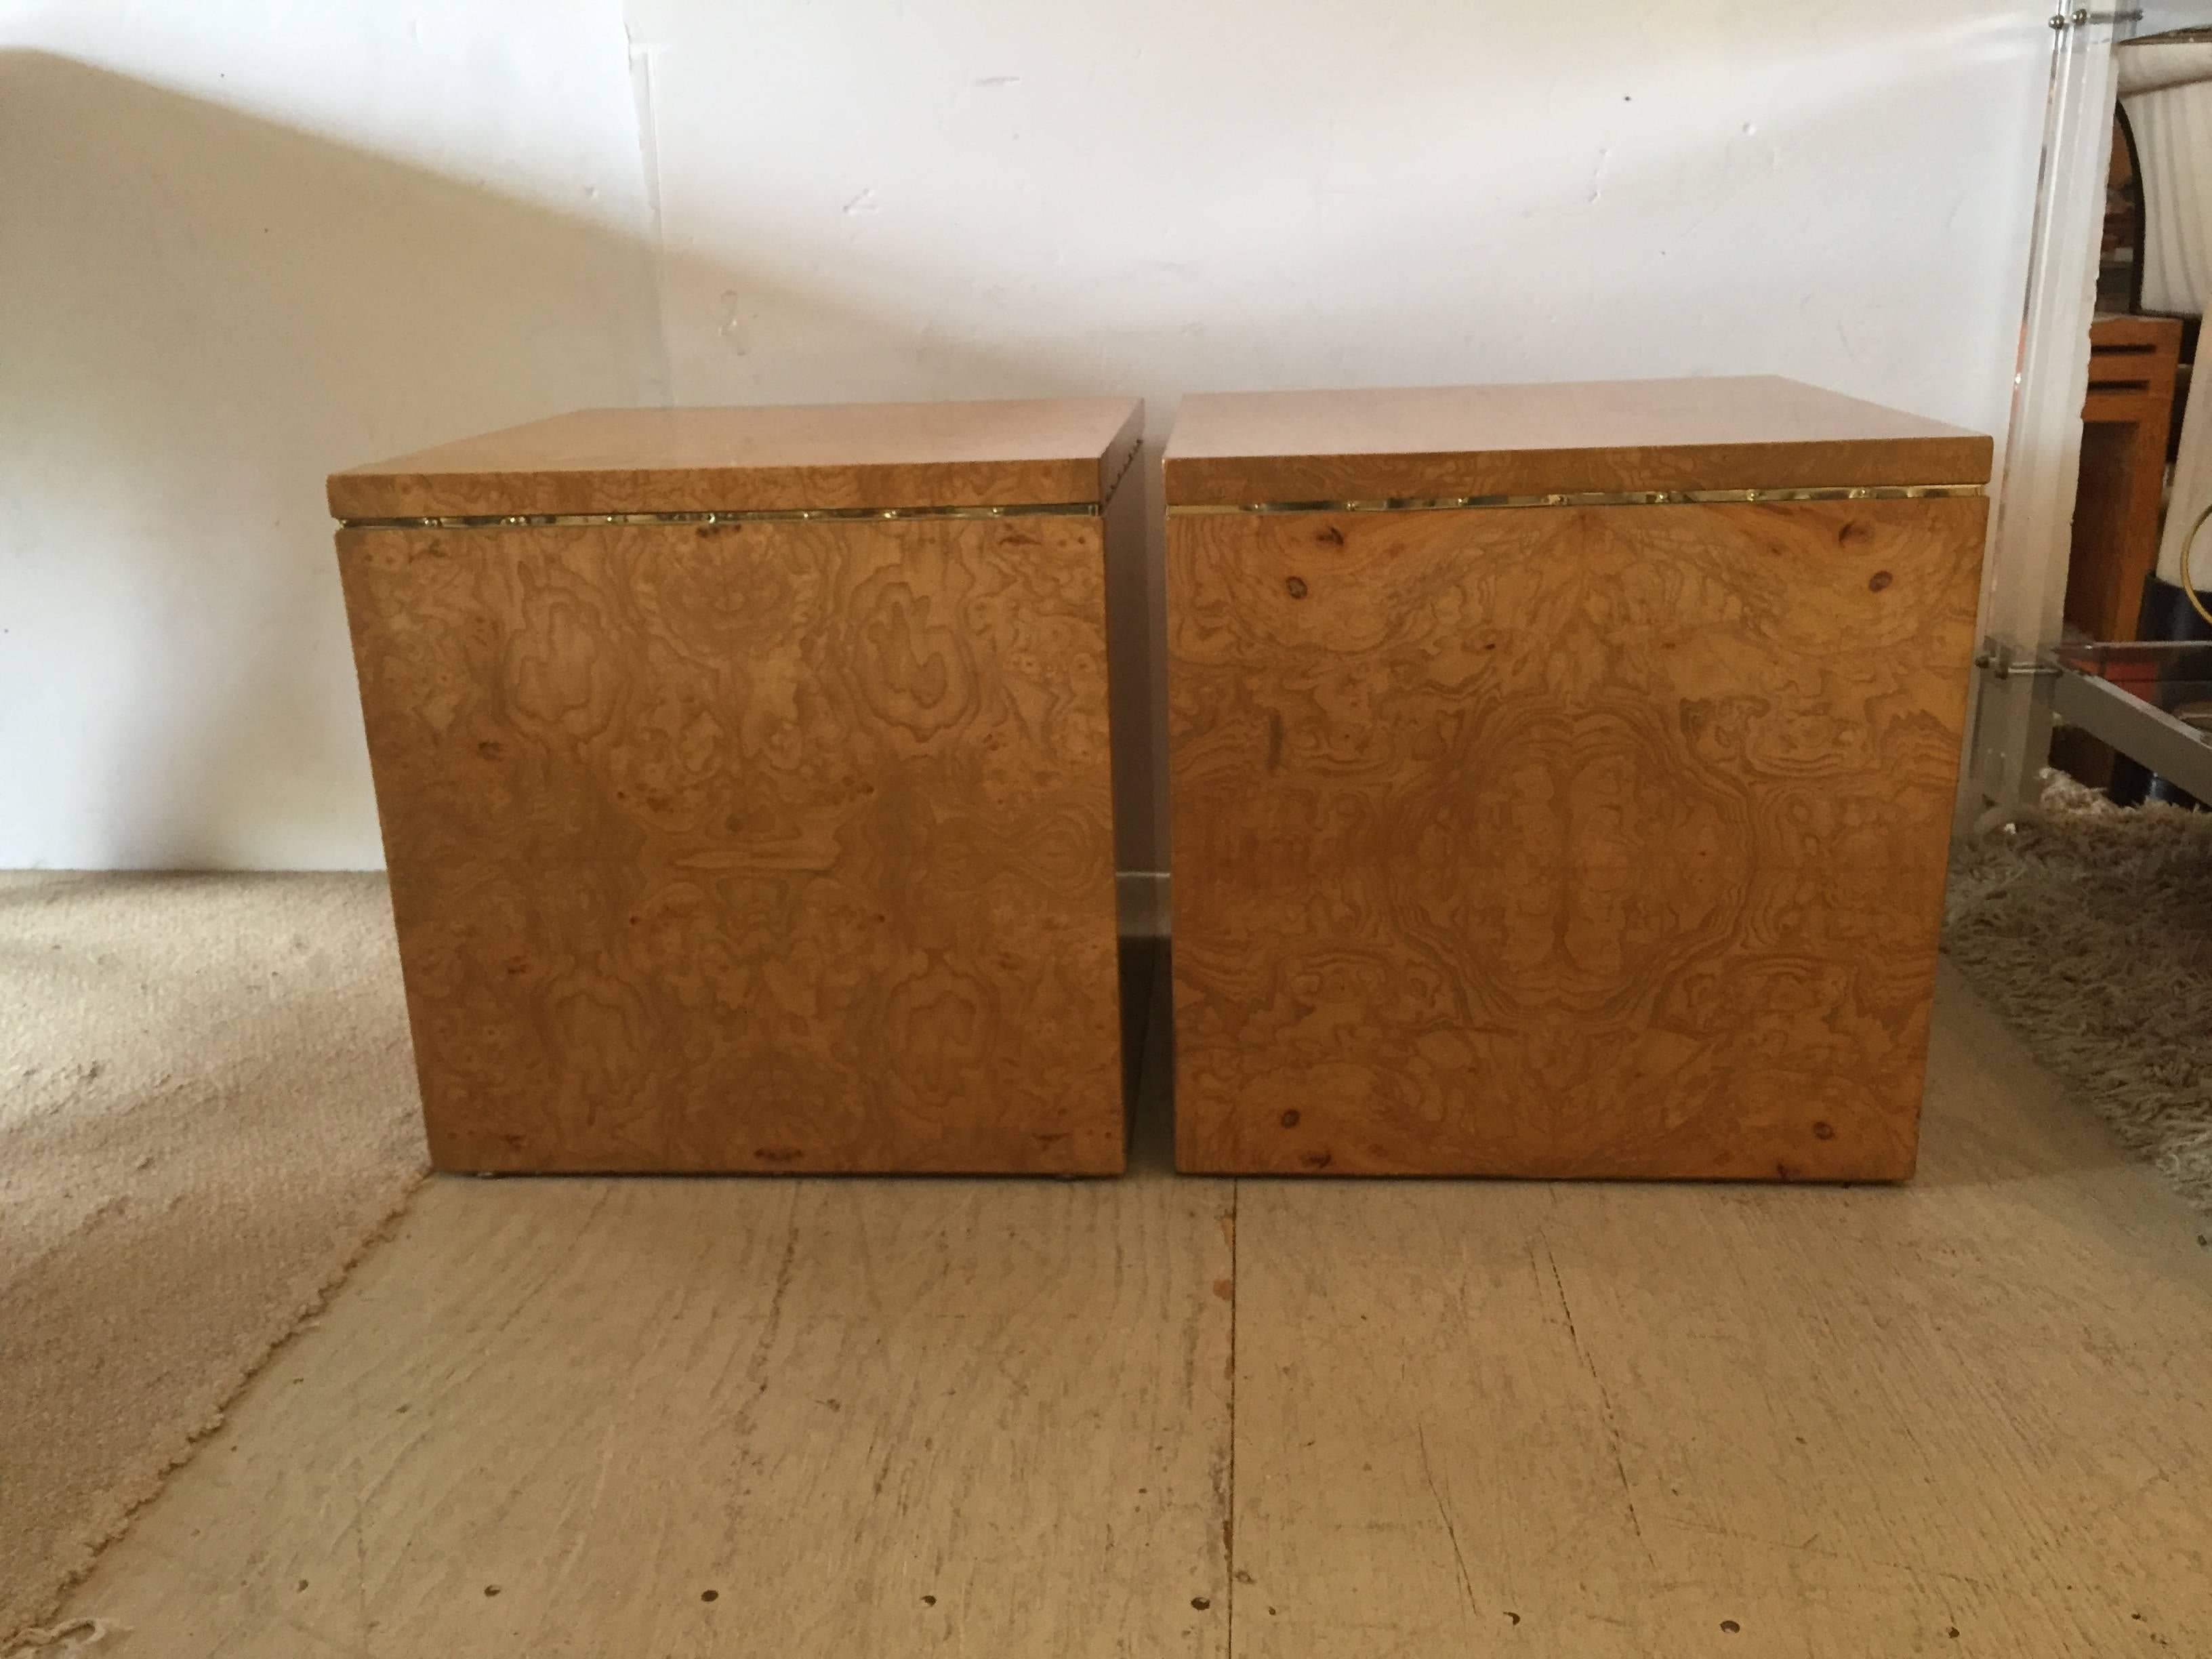 Stunning pair of glossy burl wood cubes with brass trim that make a cool pair of end tables.

Measure: 1/4” brass trim.